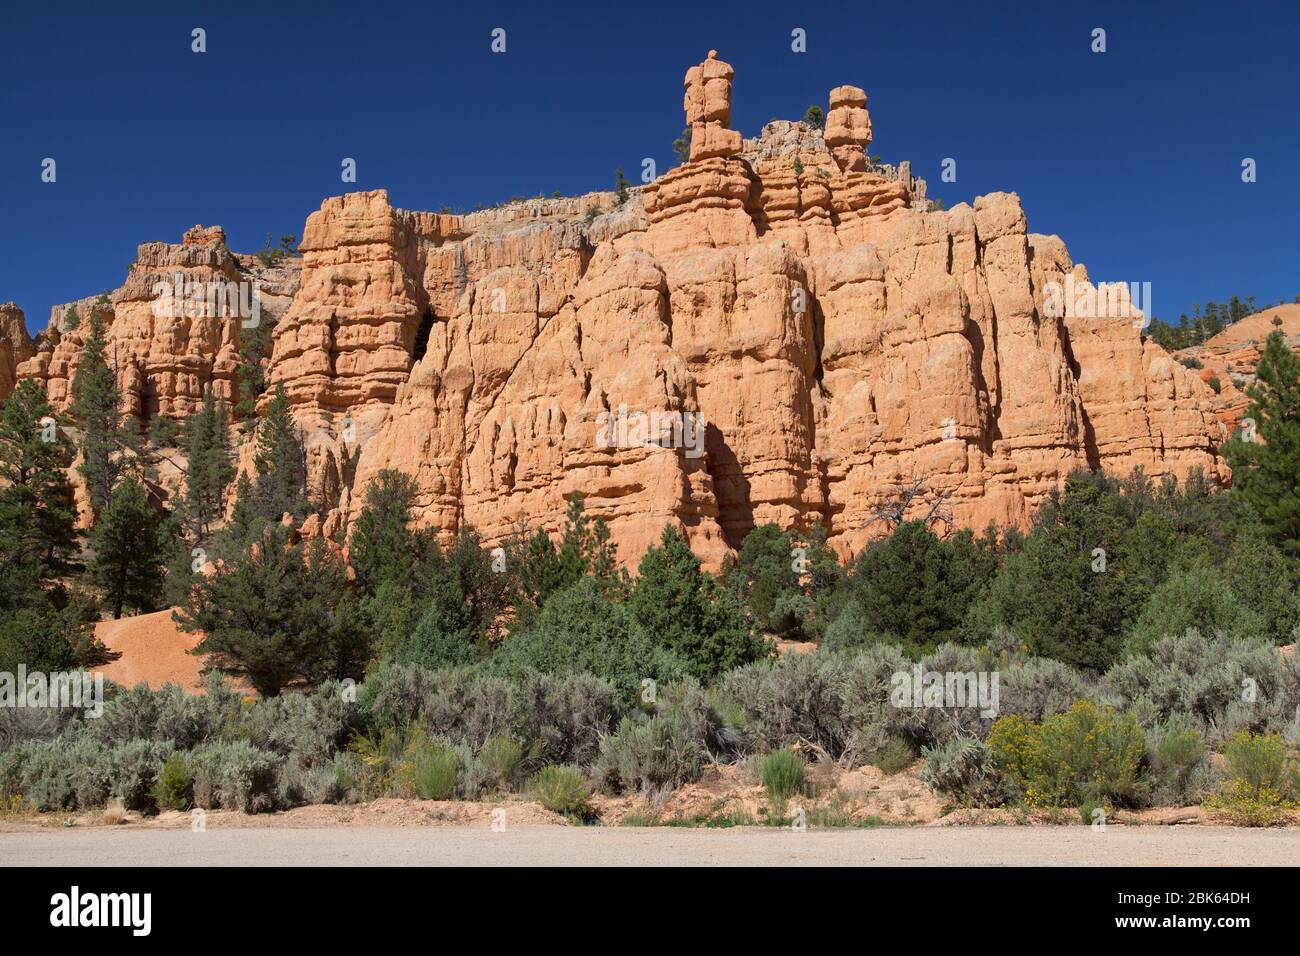 Sandstone rock formations in Red Canyon along scenic byway 12, Dixie National Forest, Utah, USA. Stock Photo